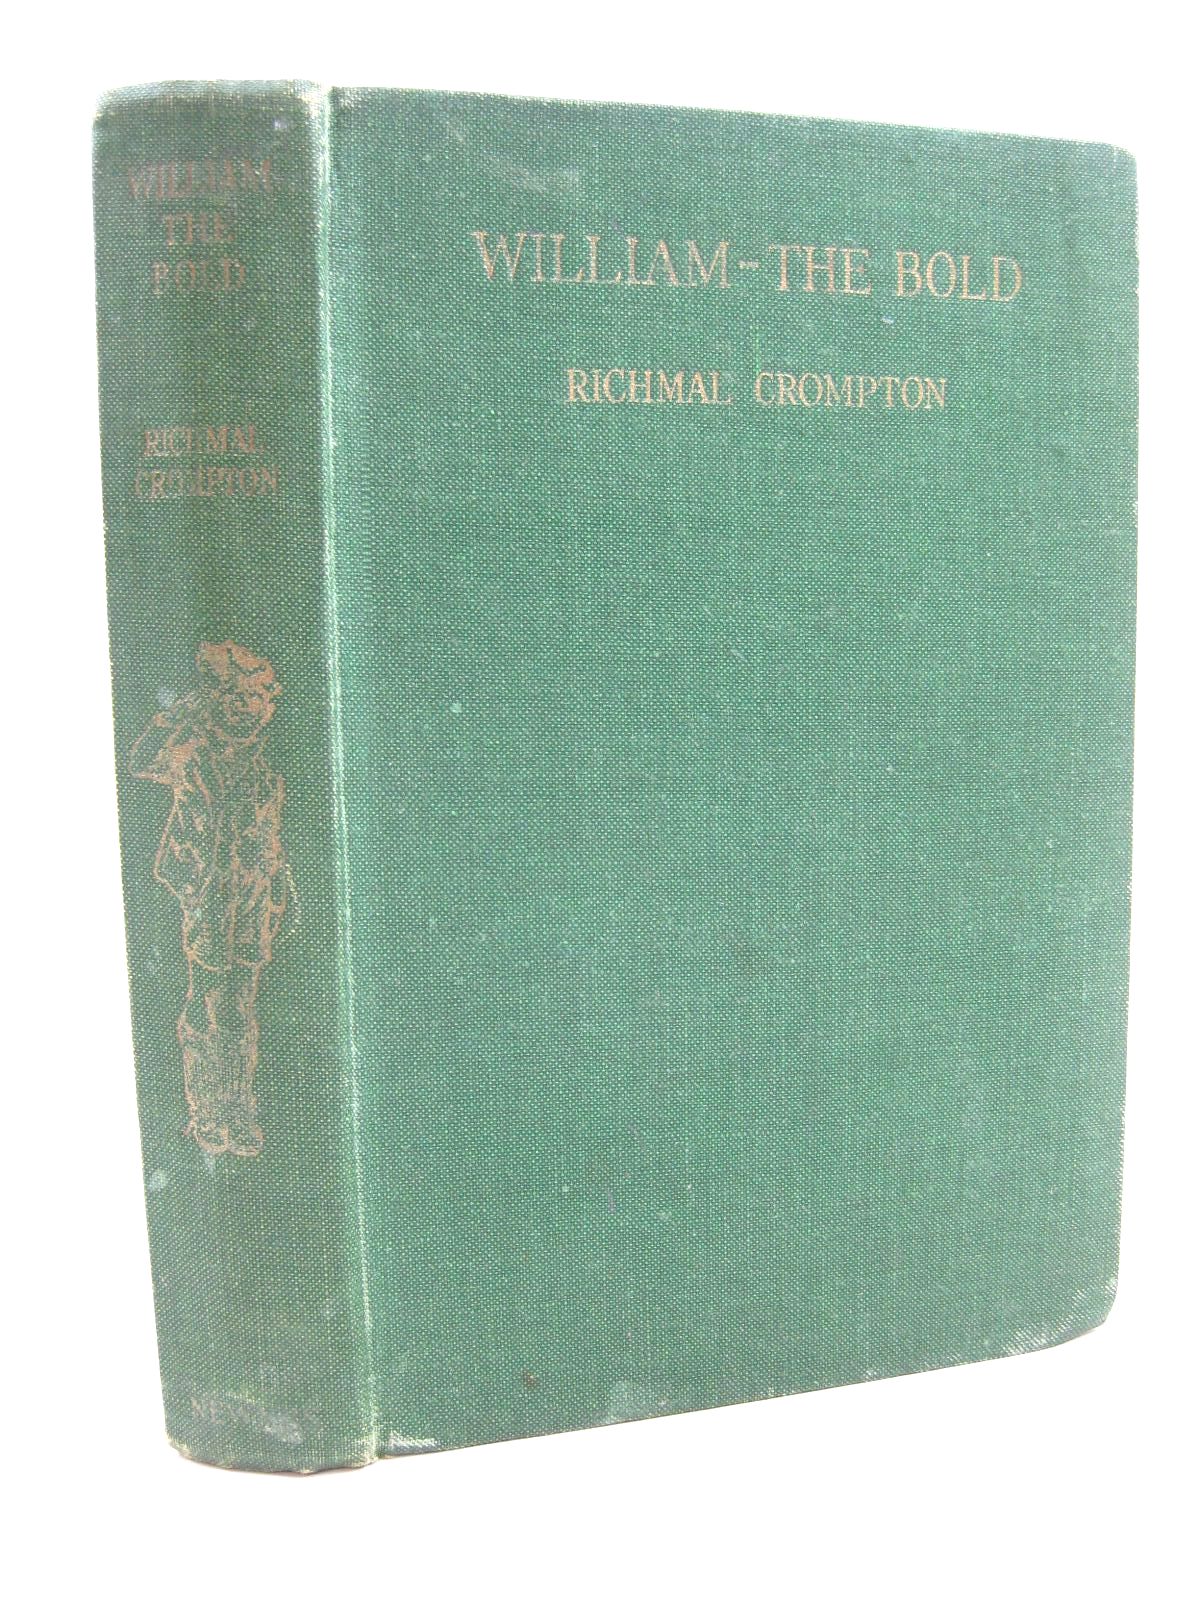 Photo of WILLIAM THE BOLD written by Crompton, Richmal illustrated by Henry, Thomas published by George Newnes Limited (STOCK CODE: 1316618)  for sale by Stella & Rose's Books